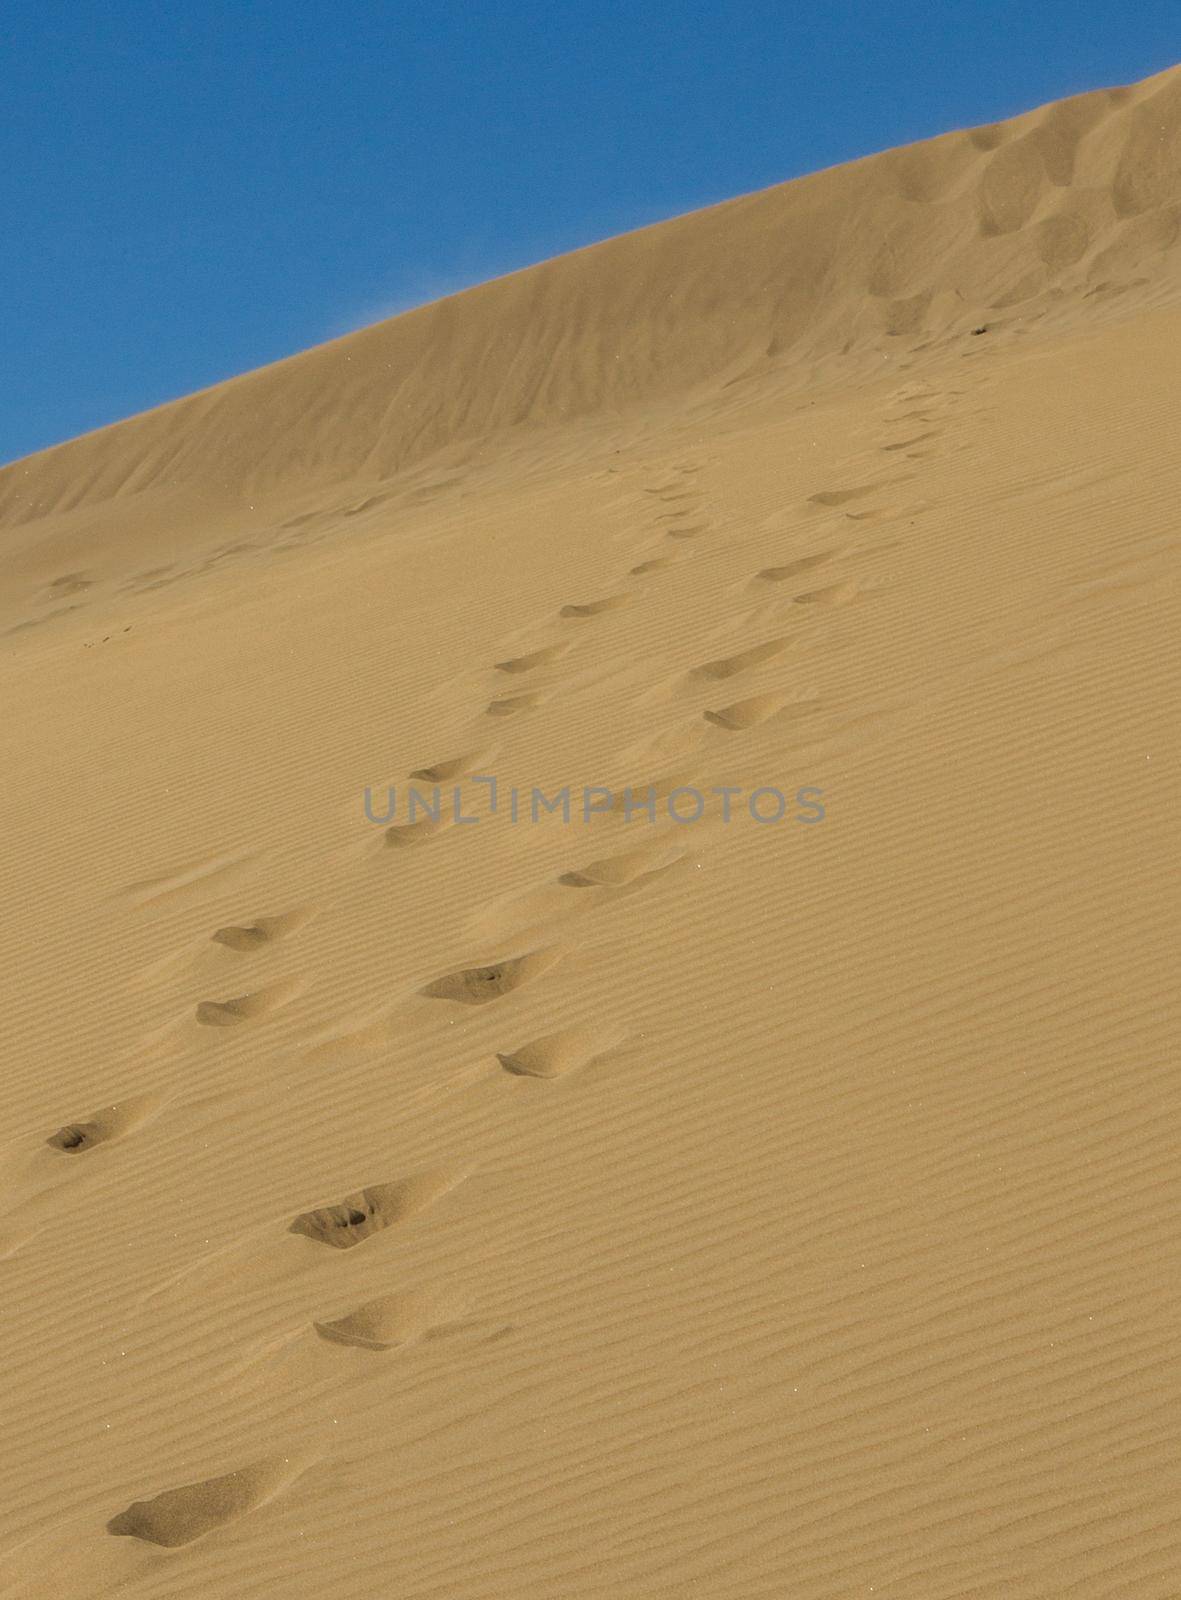 Close-up of a track of footprints in a sand dune on a sunny day